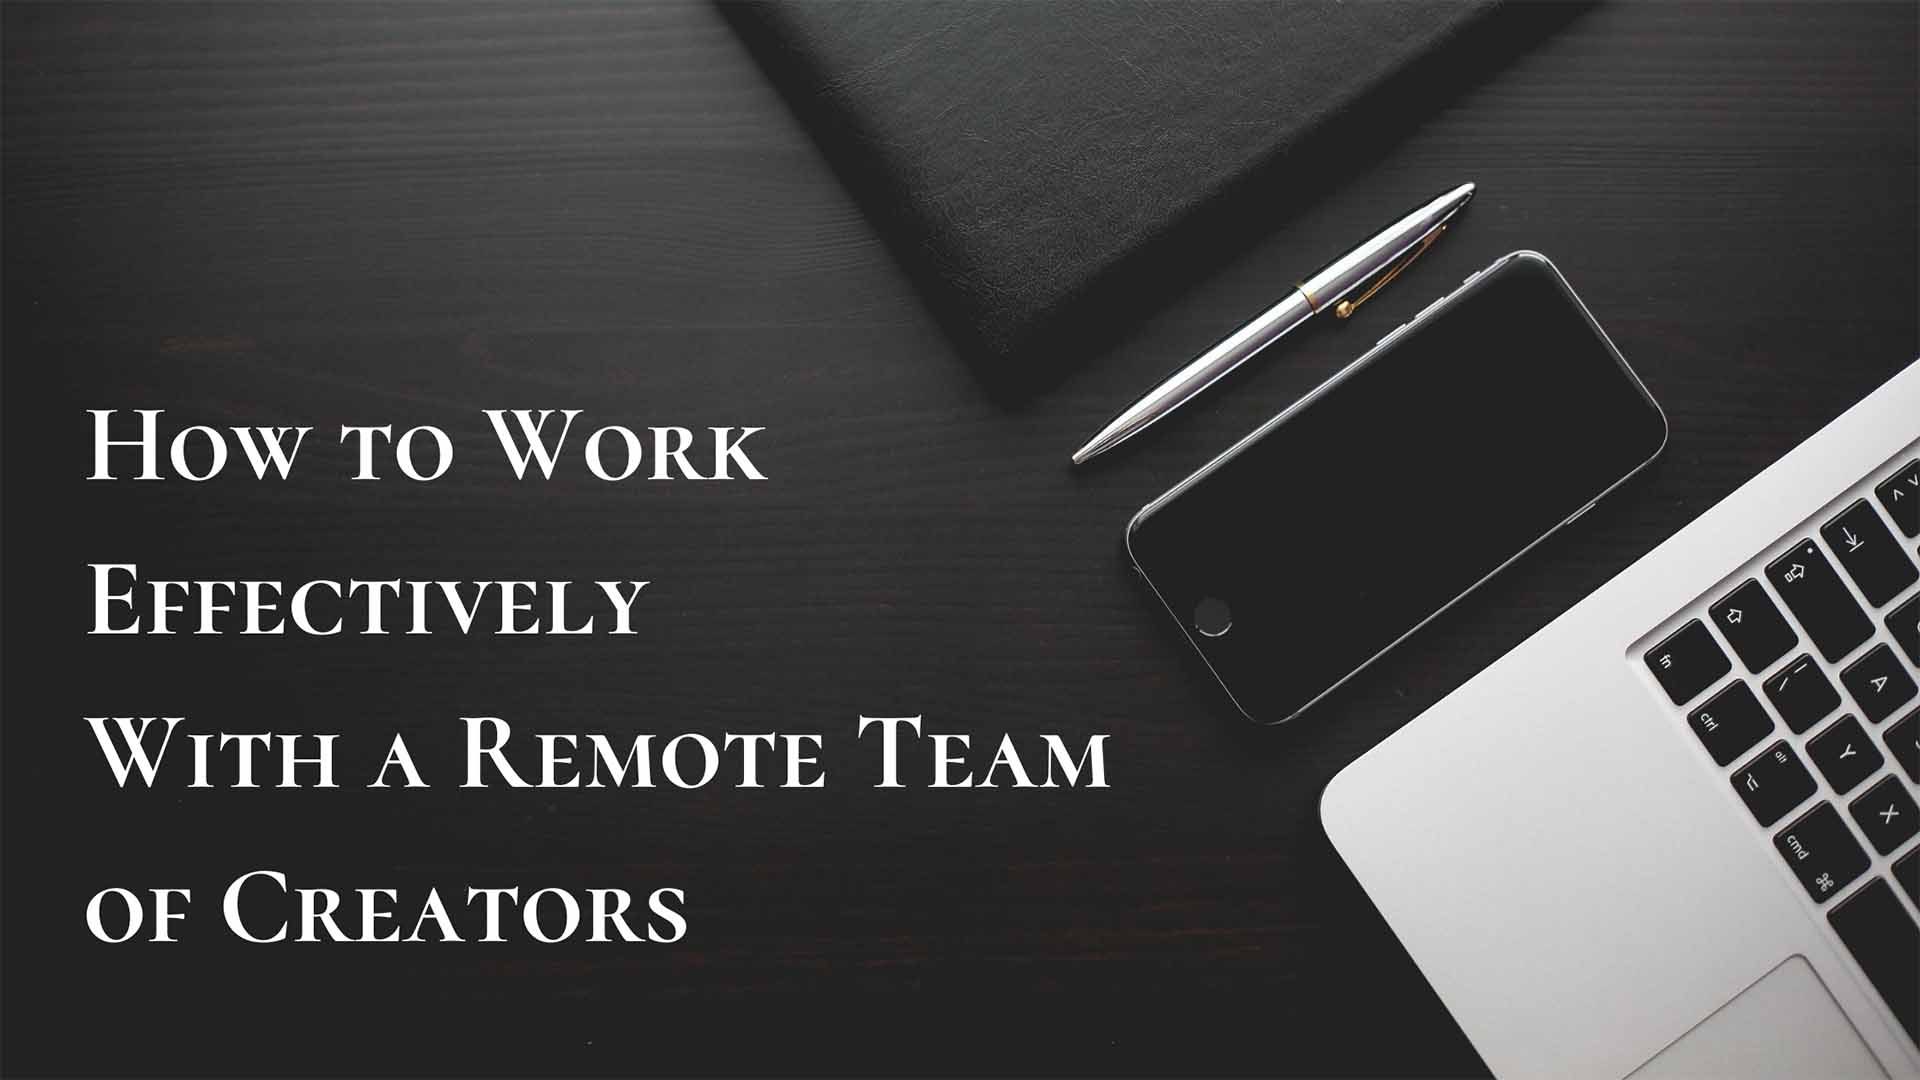 How-to-Work-Effectively-With-a-Remote-Team-of-Creators-opt